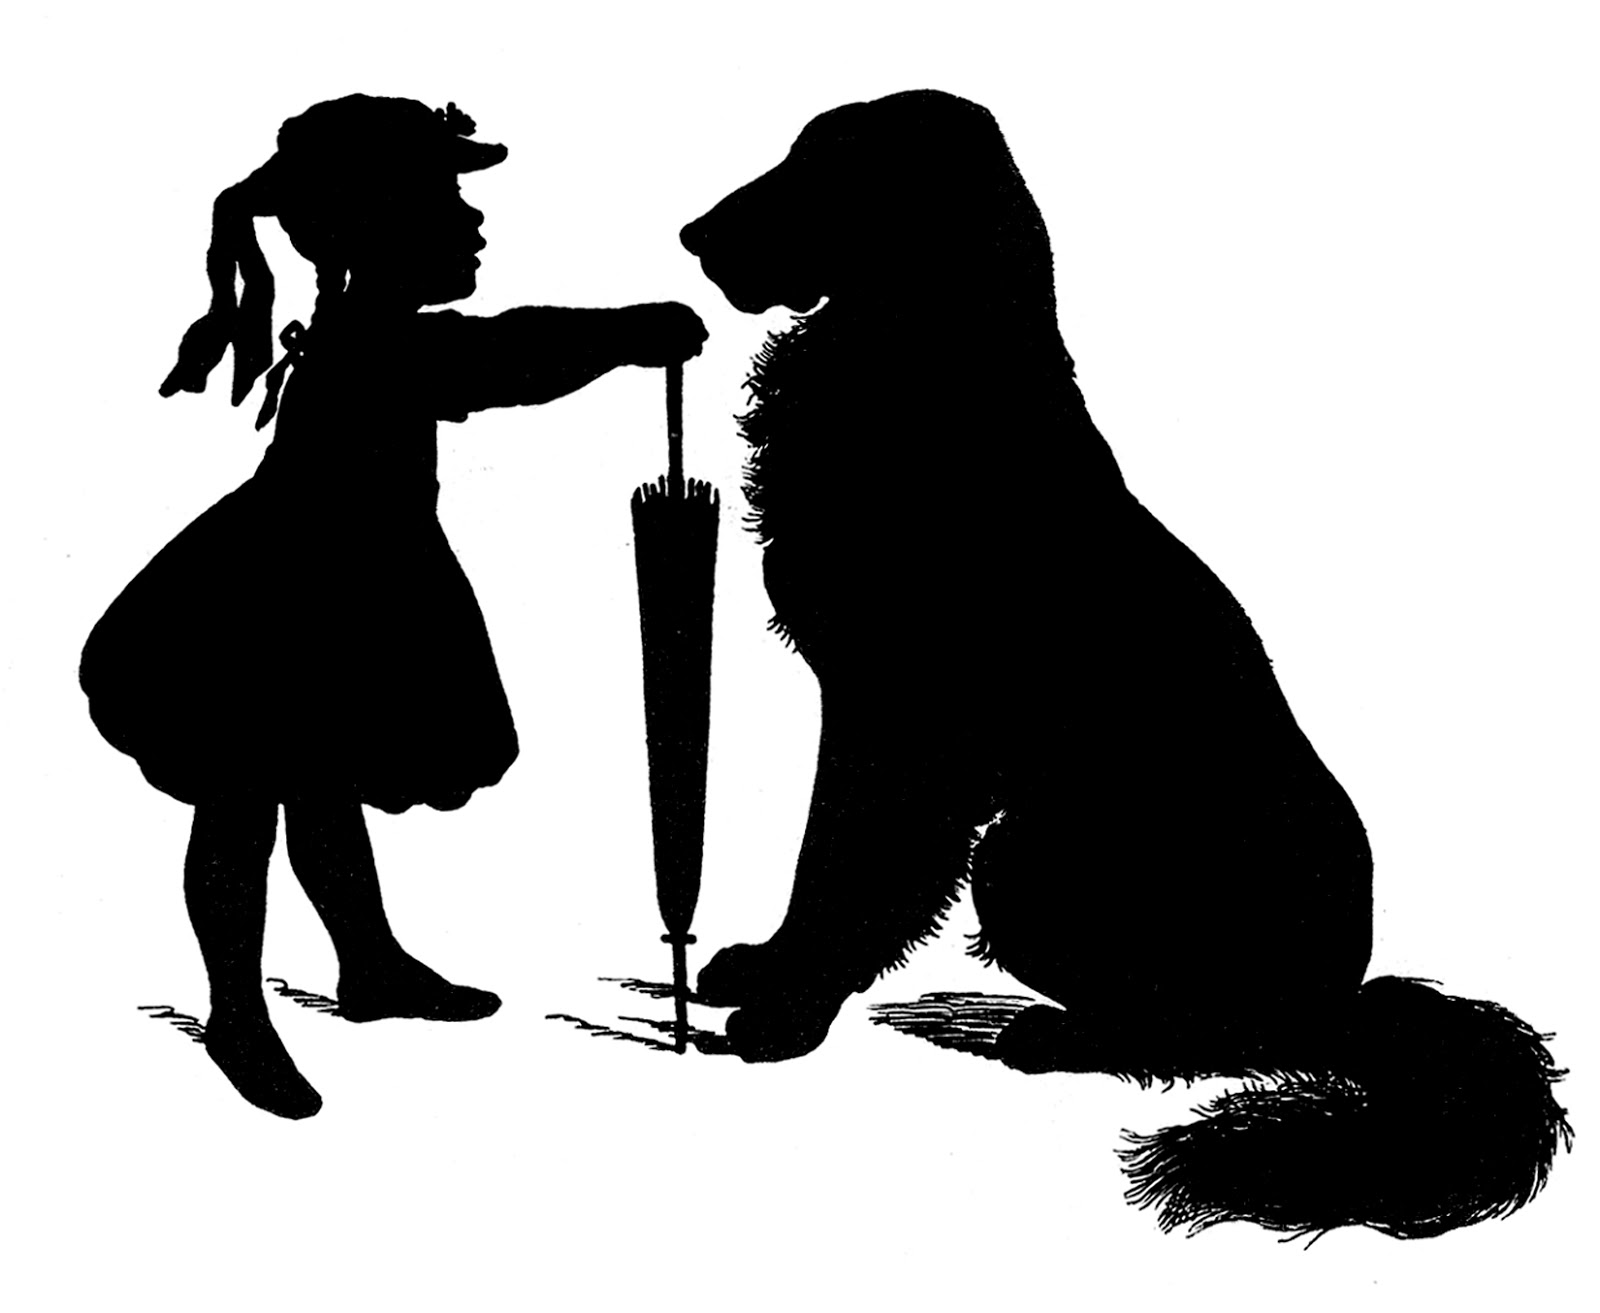 Free Vector Download - Silhouette - Girl with Dog - The Graphics Fairy